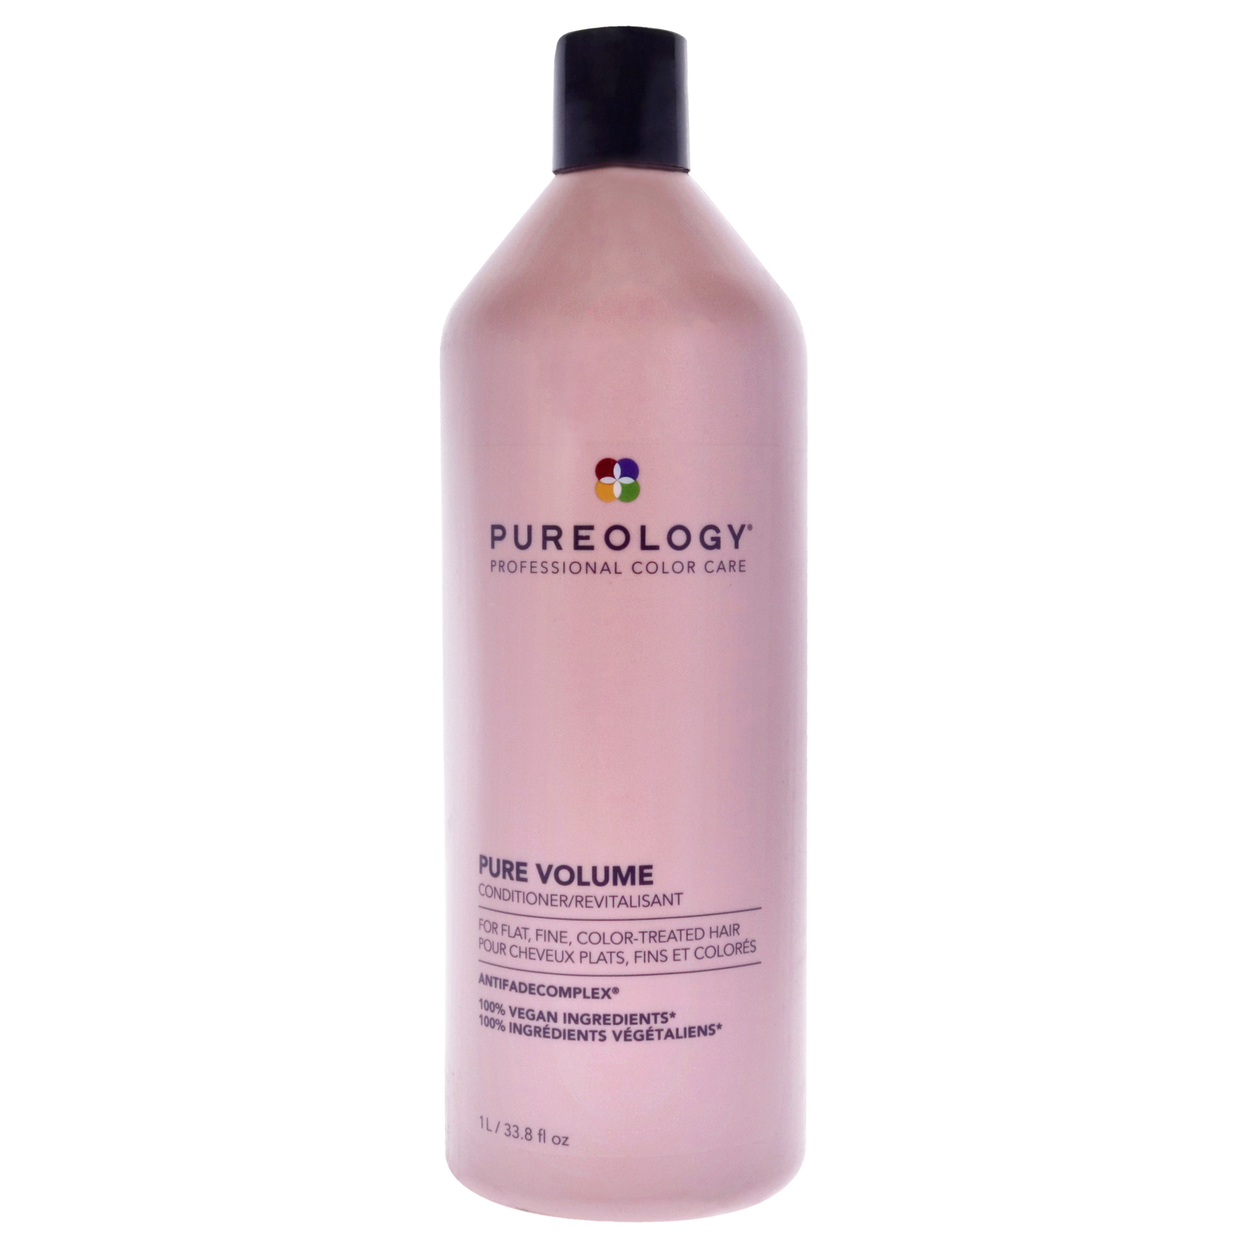 Pureology Unisex HAIRCARE Pure Volume Conditioner 1 Liter